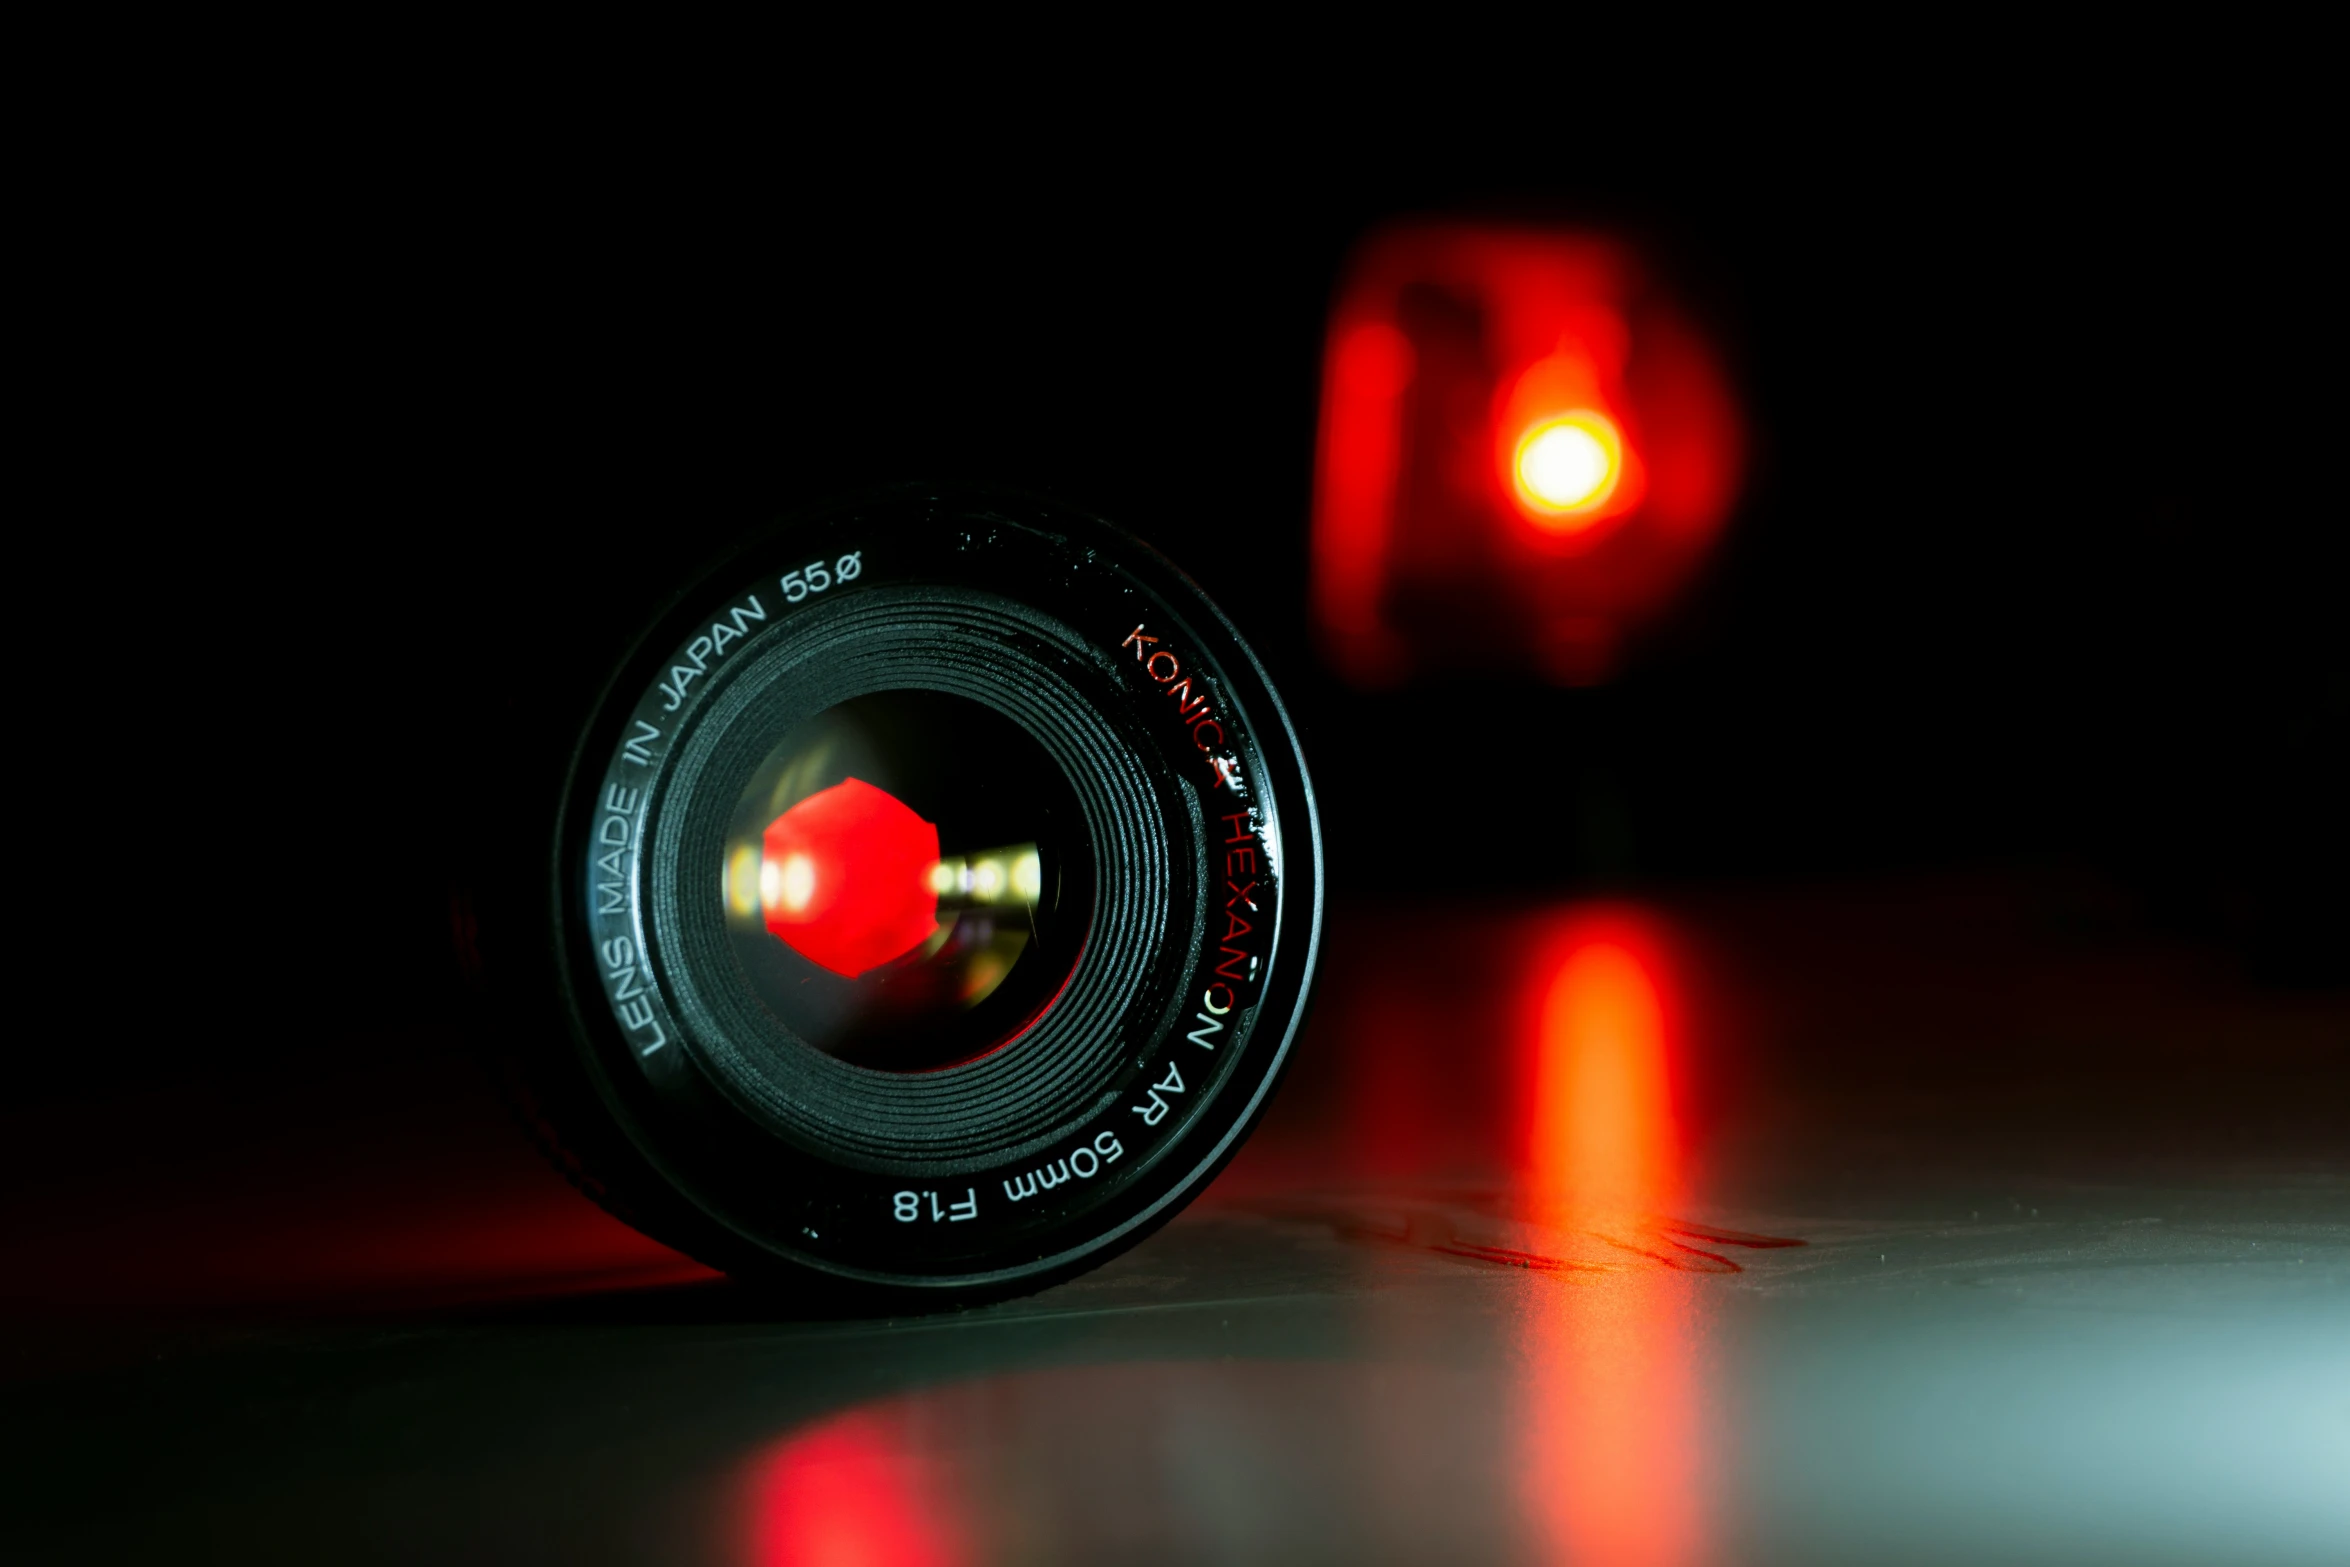 two light and a lens are seen against the darkness